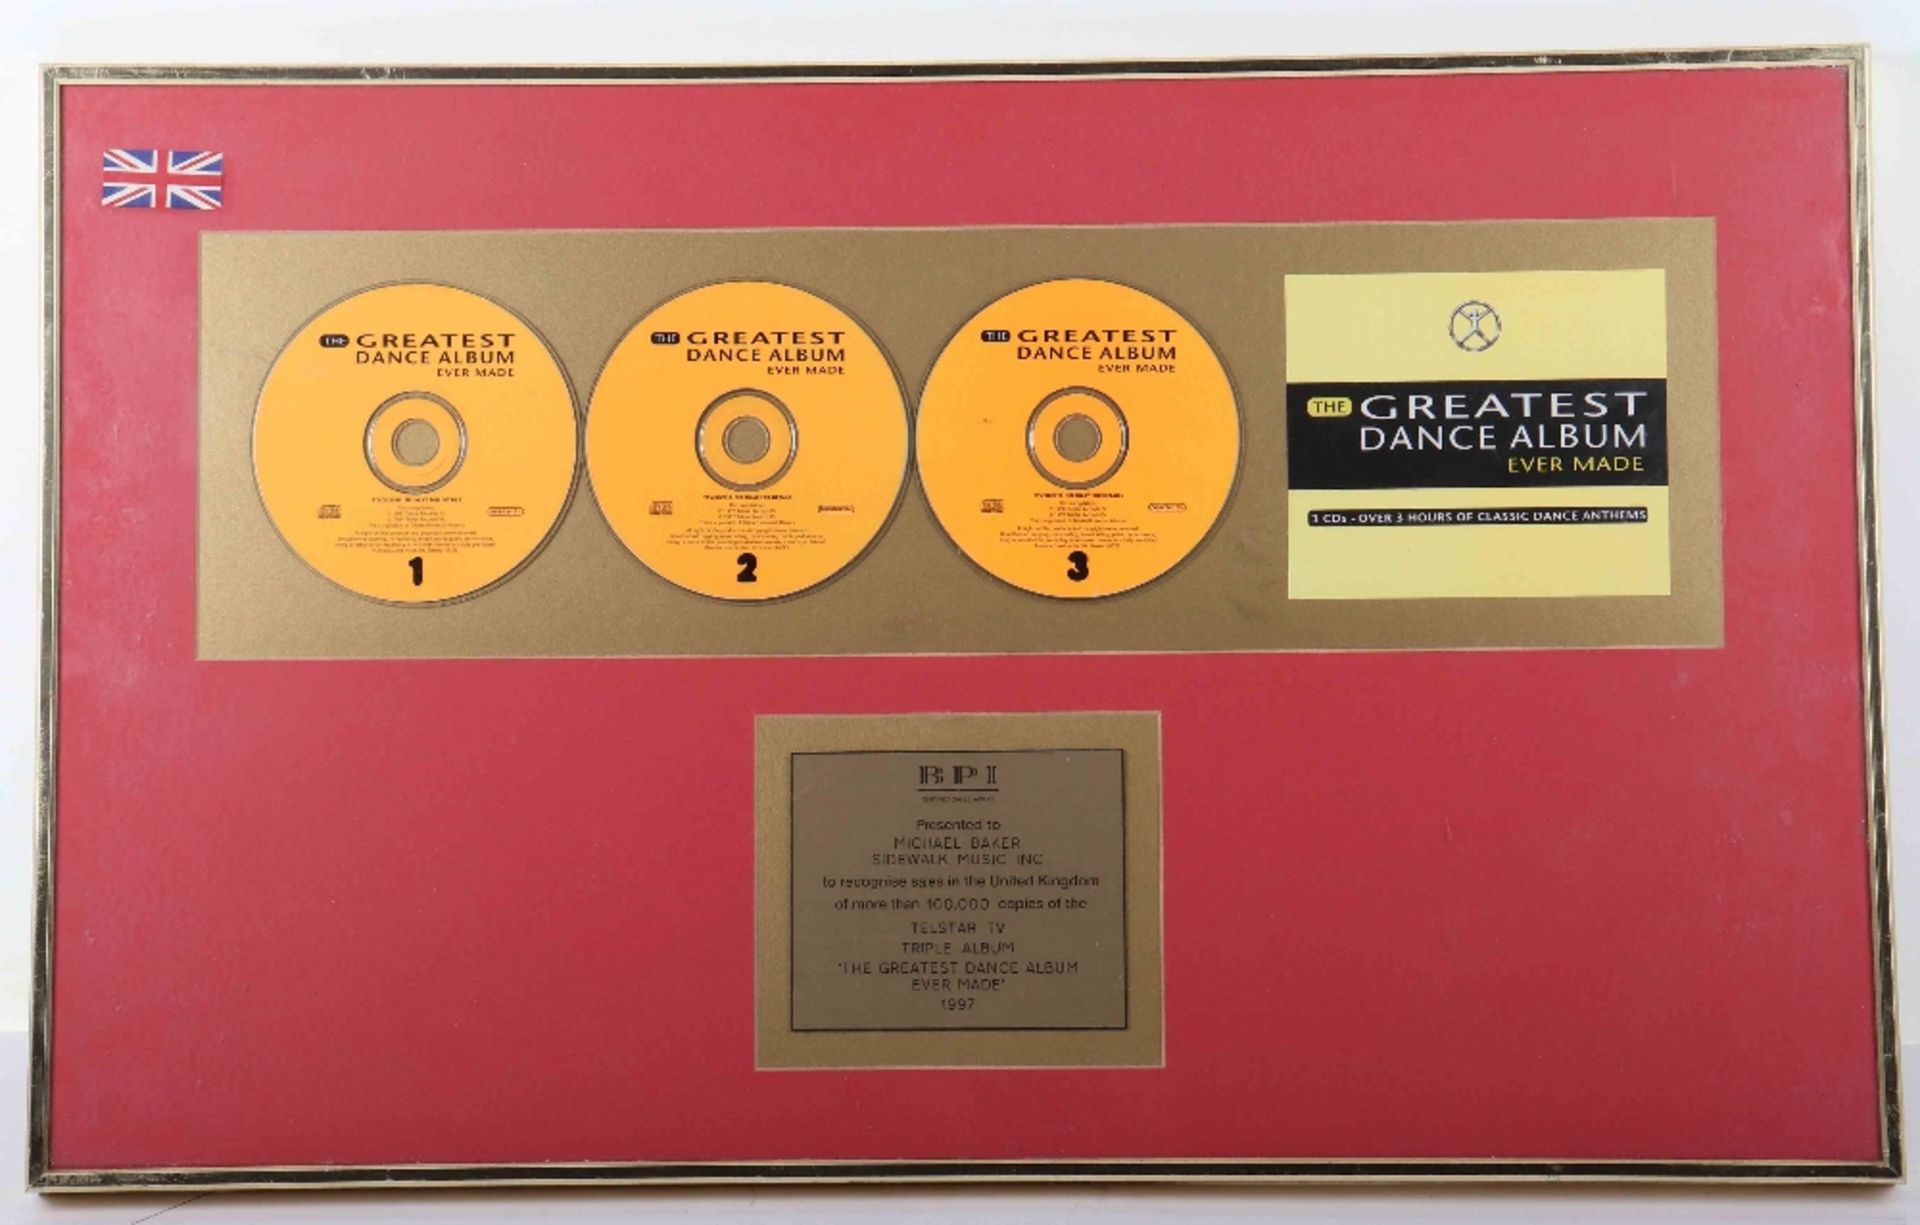 Triple album award by BPI for ‘Greatest Dance Album Ever Made’ of sales in the UK of over 100,000 co